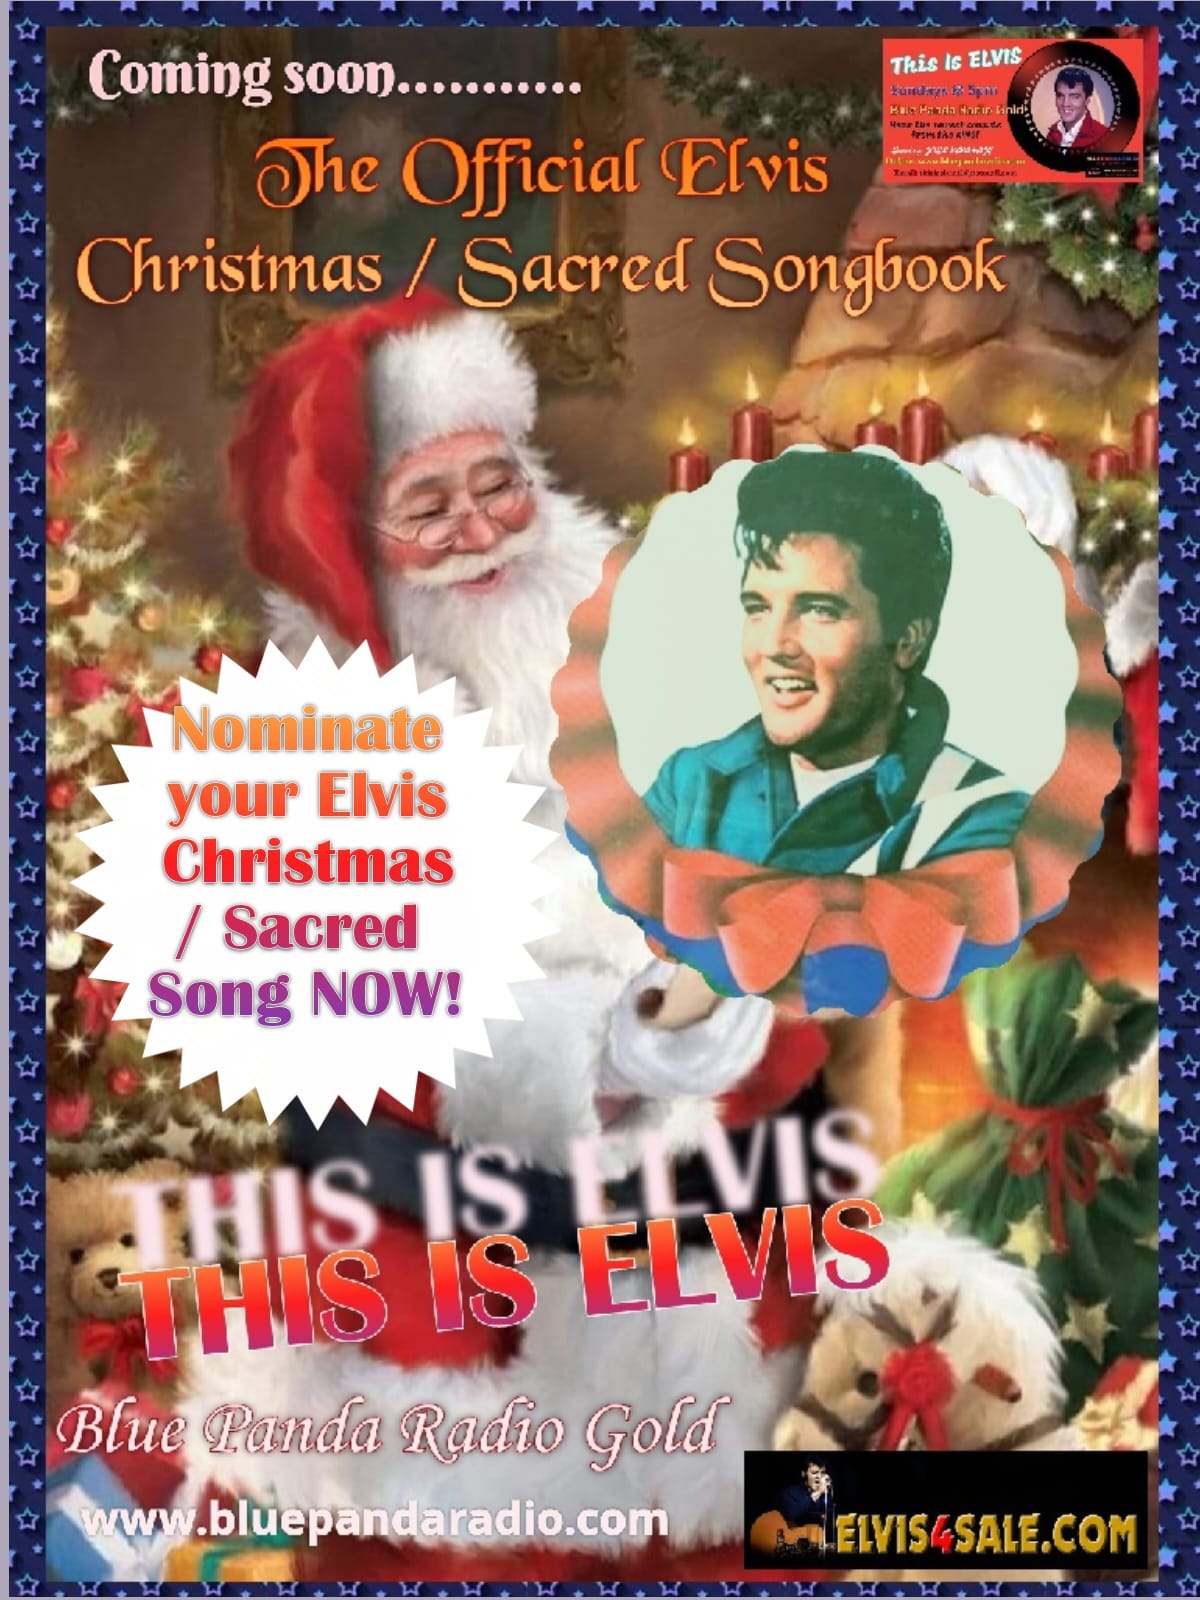 Get your Elvis requests in for Xmas…